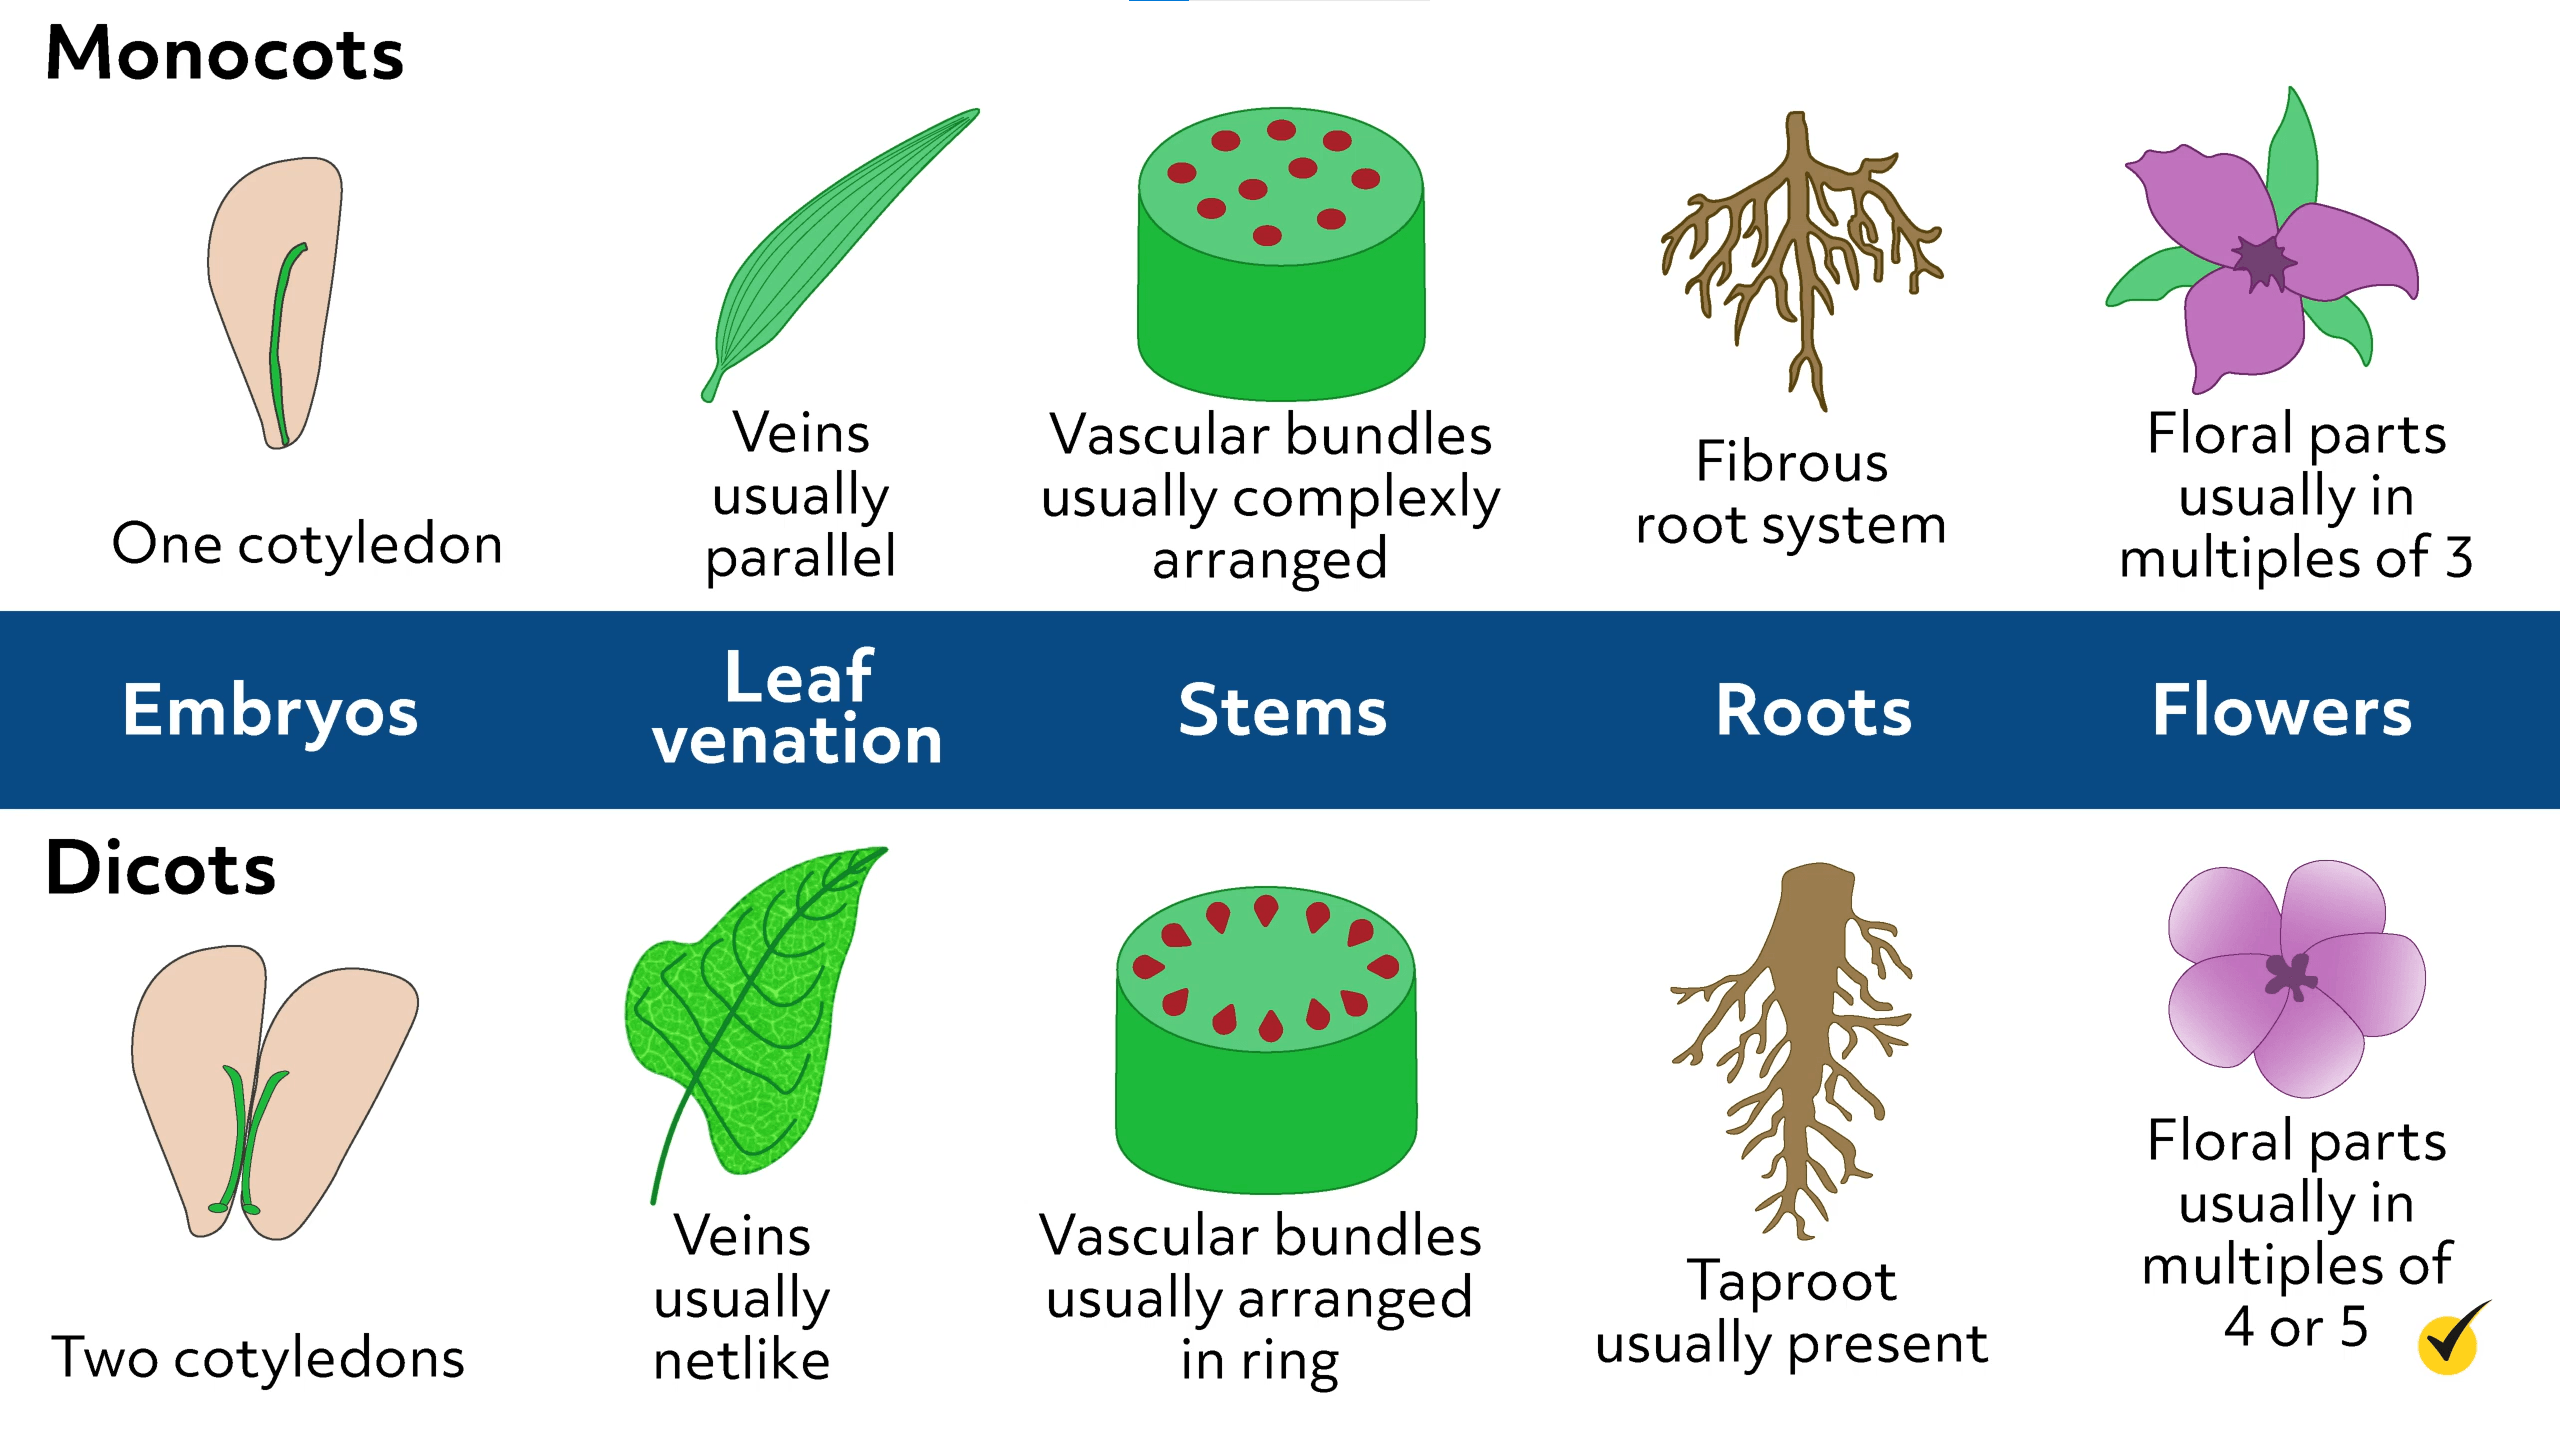 Image of the differences between monocots and dicots. 